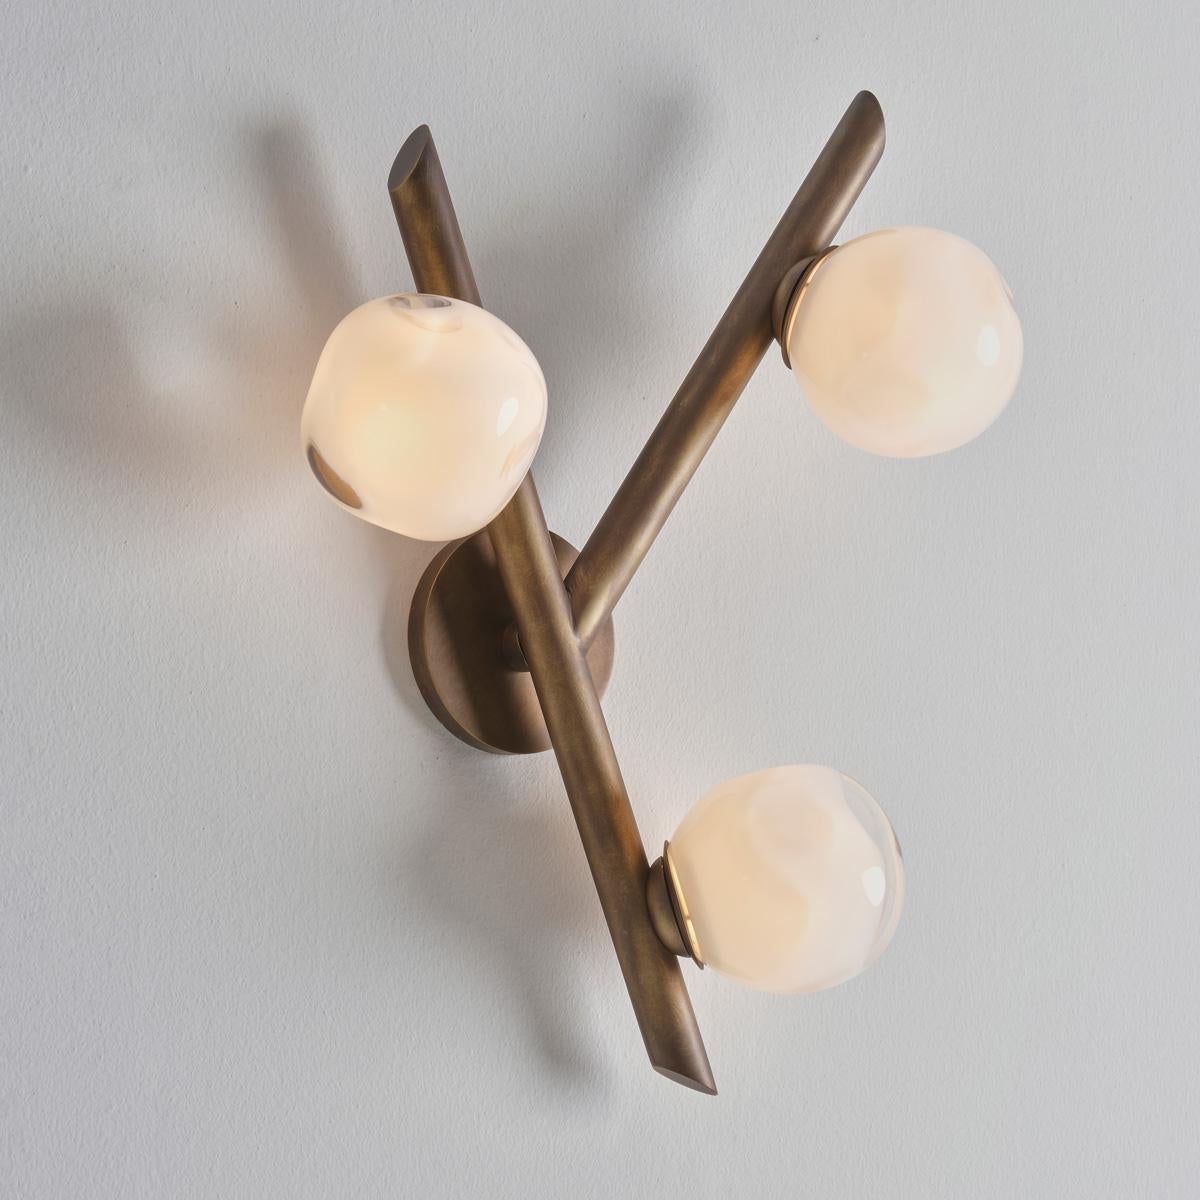 Contemporary Antares Wall Light by Gaspare Asaro- Satin Brass Finish For Sale